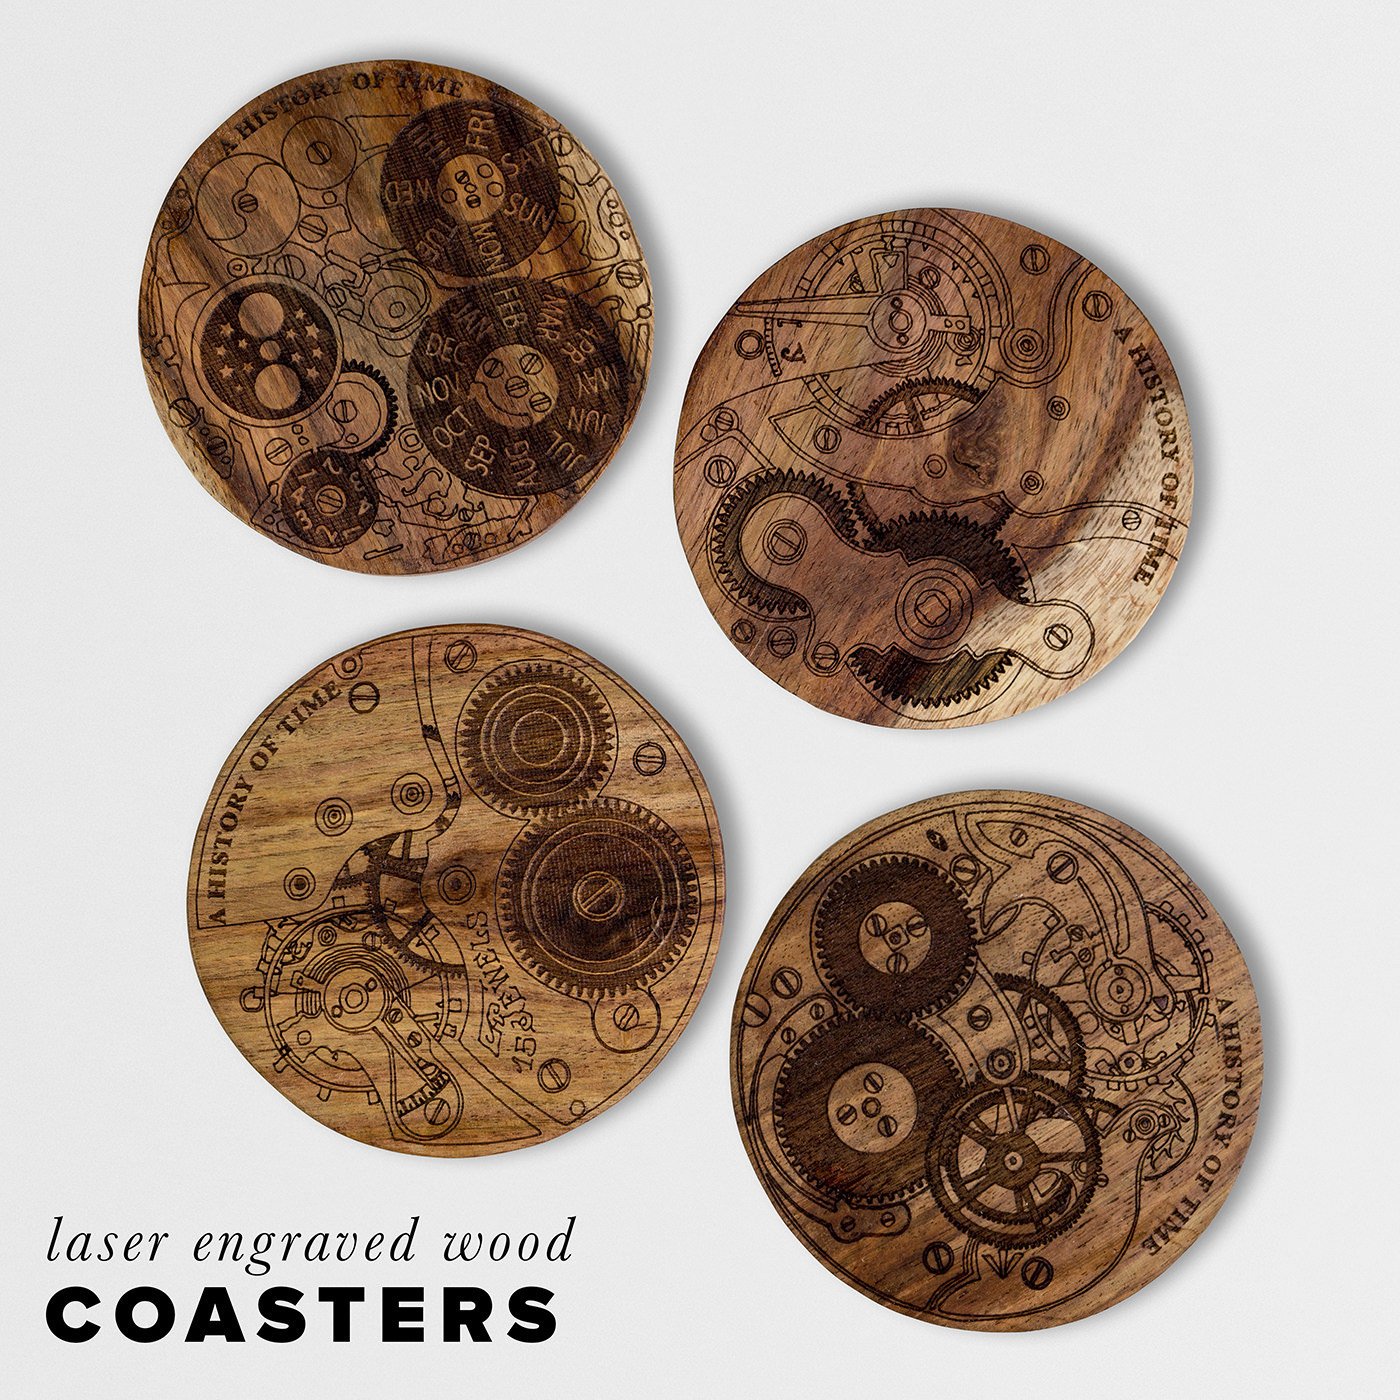 History of Time Coasters